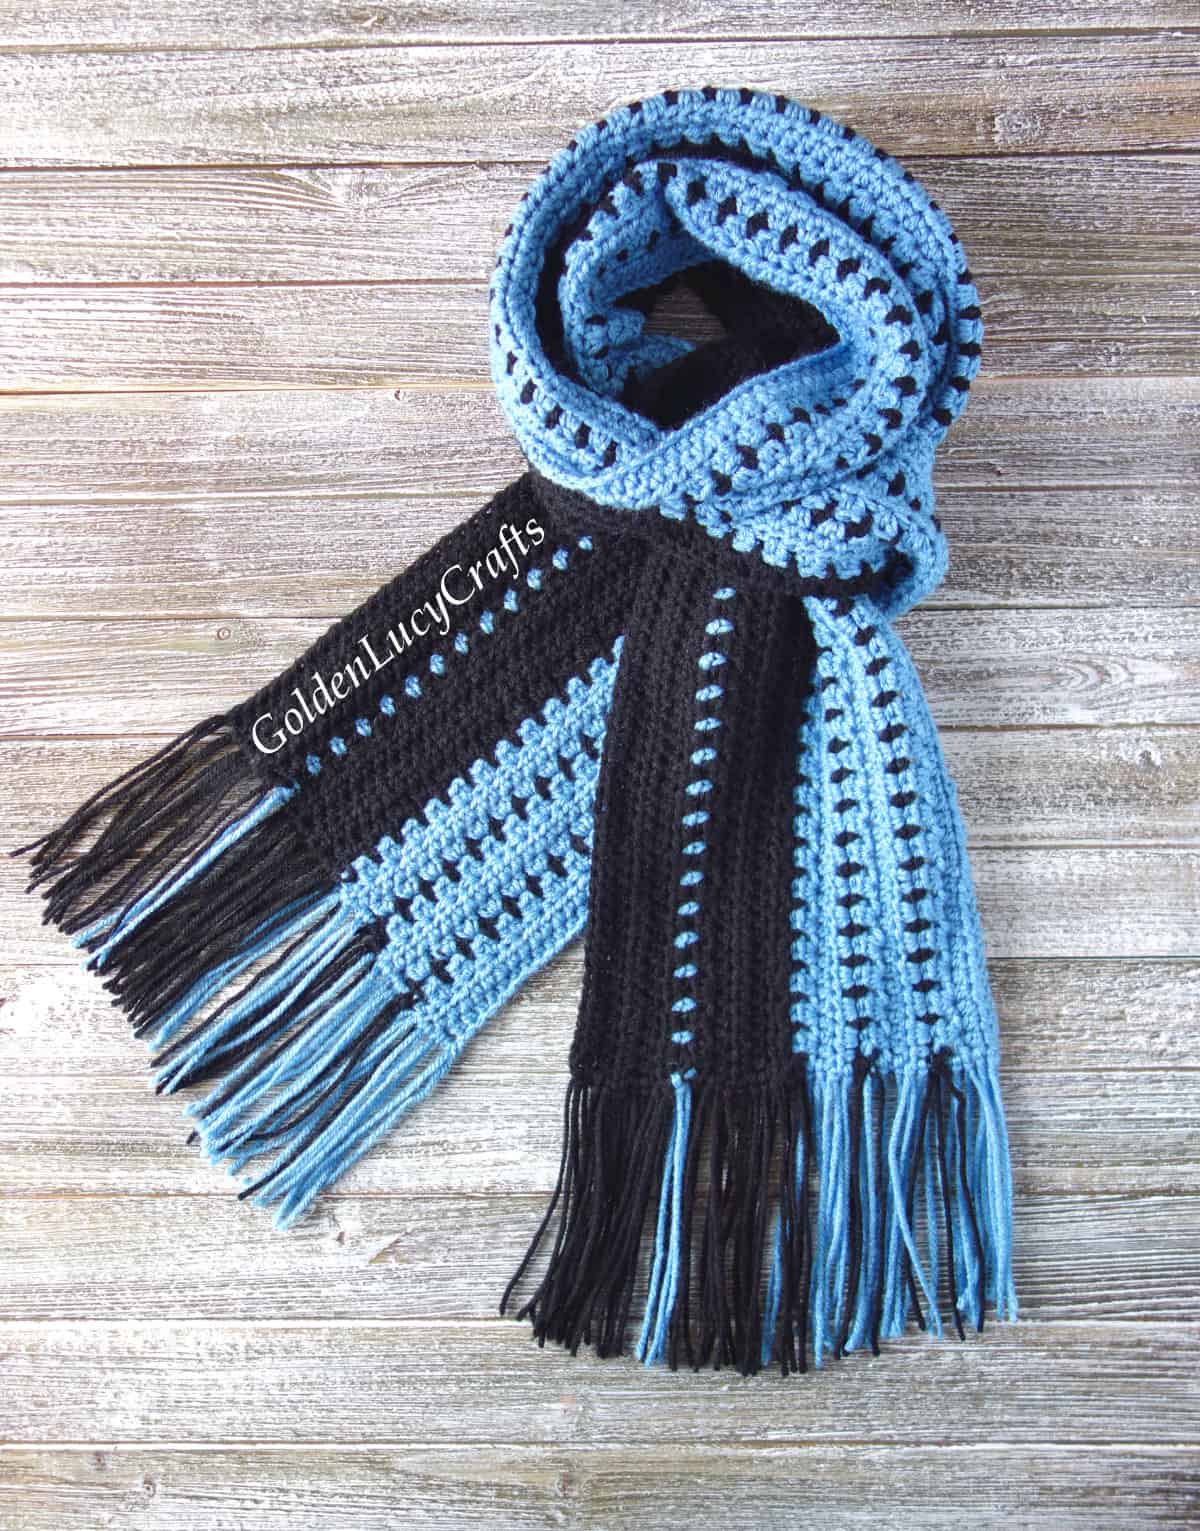 Crochet scarf for men in blue and black colors.